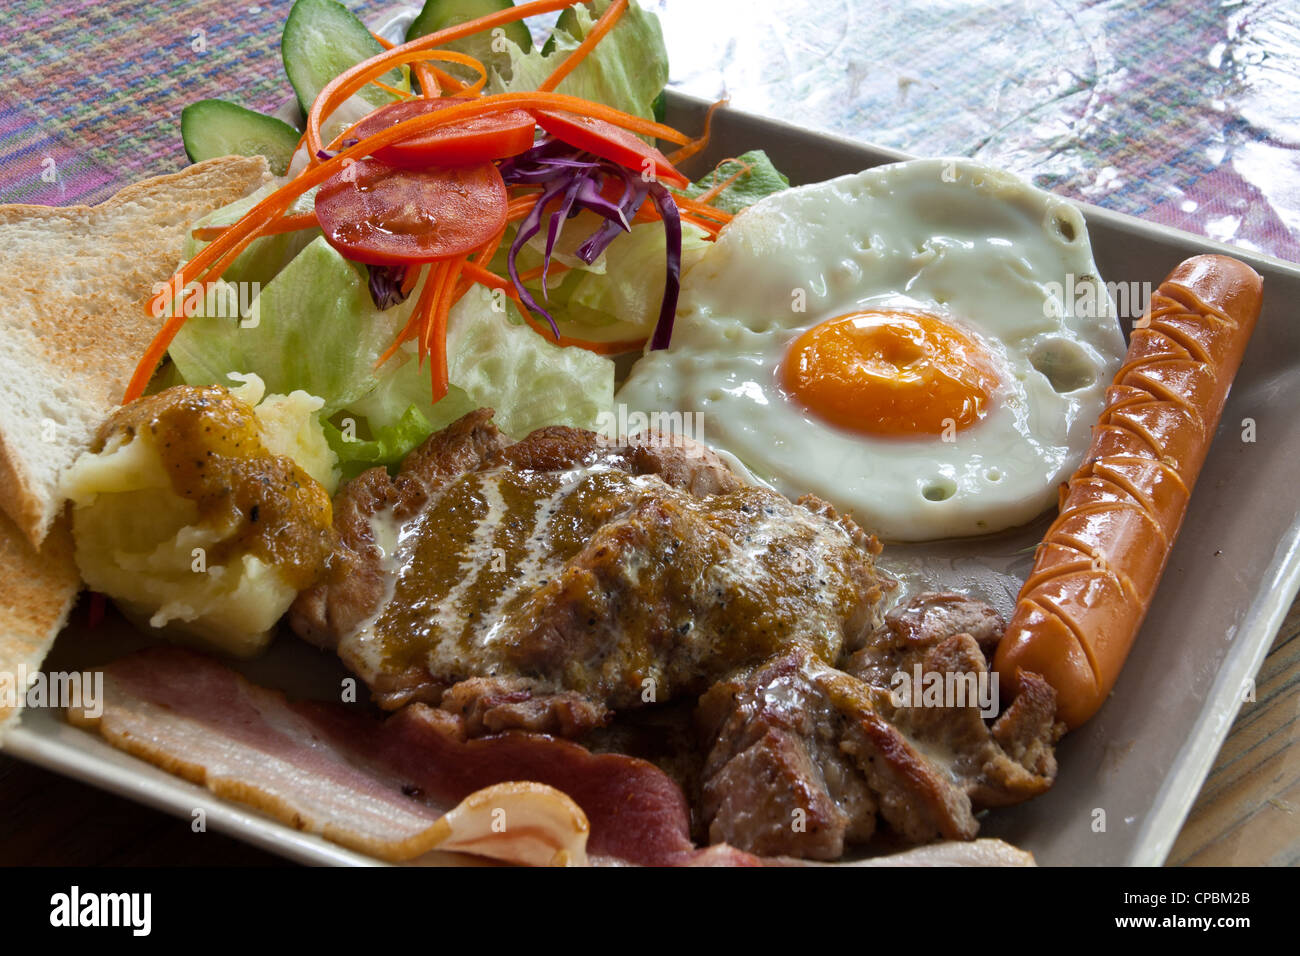 Steak pork, bacon, fried egg, sausage, bread and salad. Stock Photo